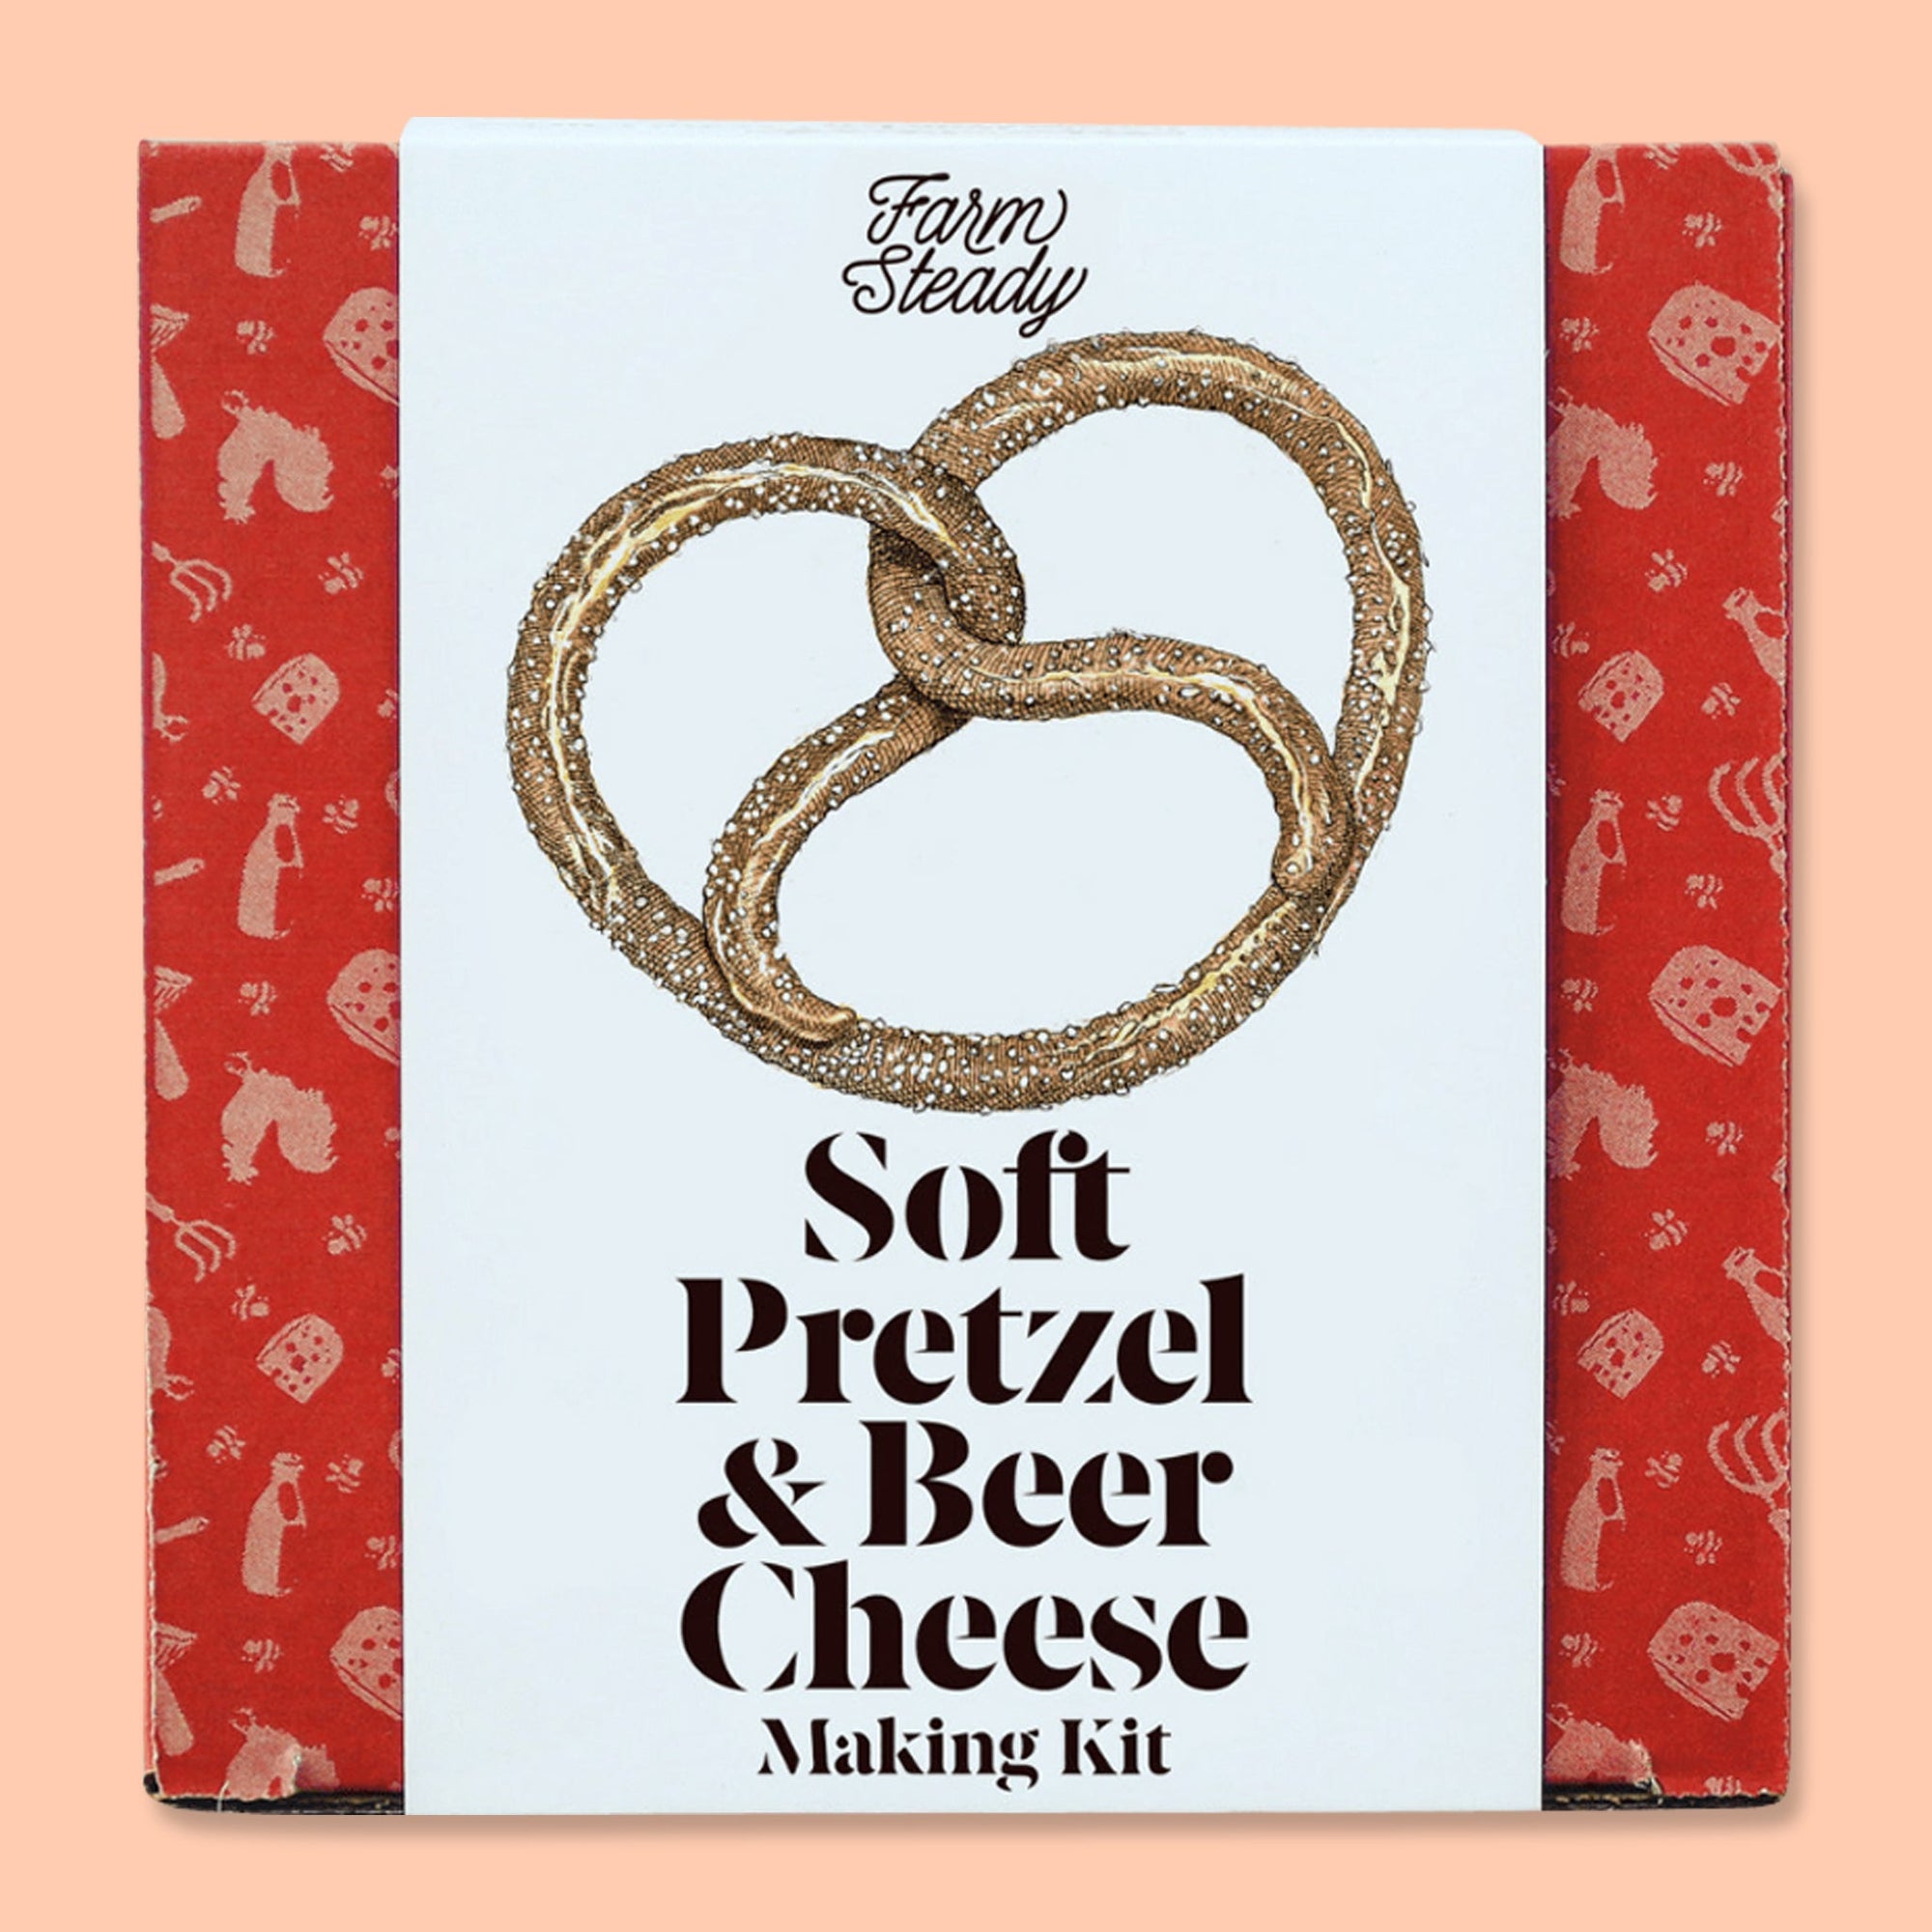 Make Your Own Pretzel & Beer Cheese